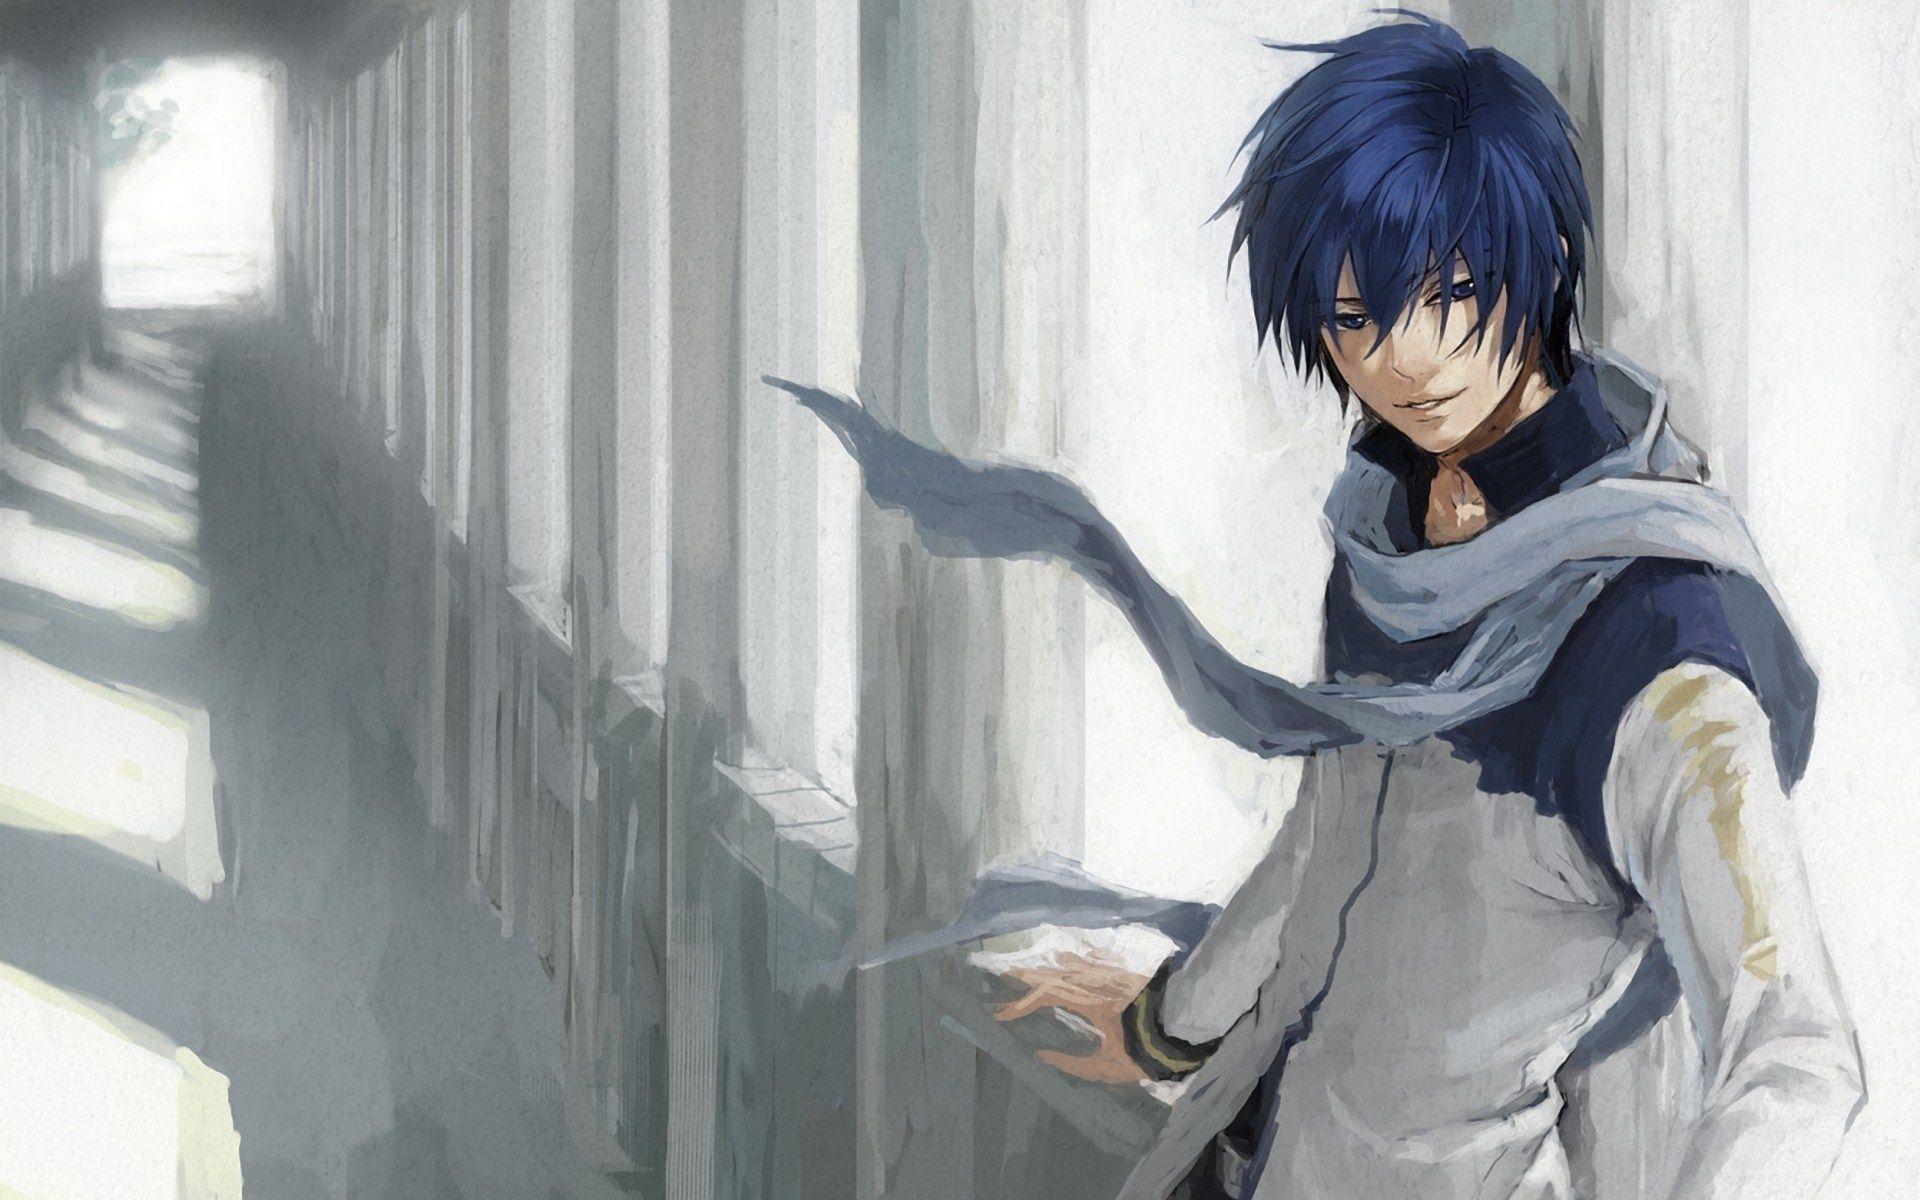 Cute Anime Boy Wallpapers - Top 65 Best Cute Anime Boy Backgrounds